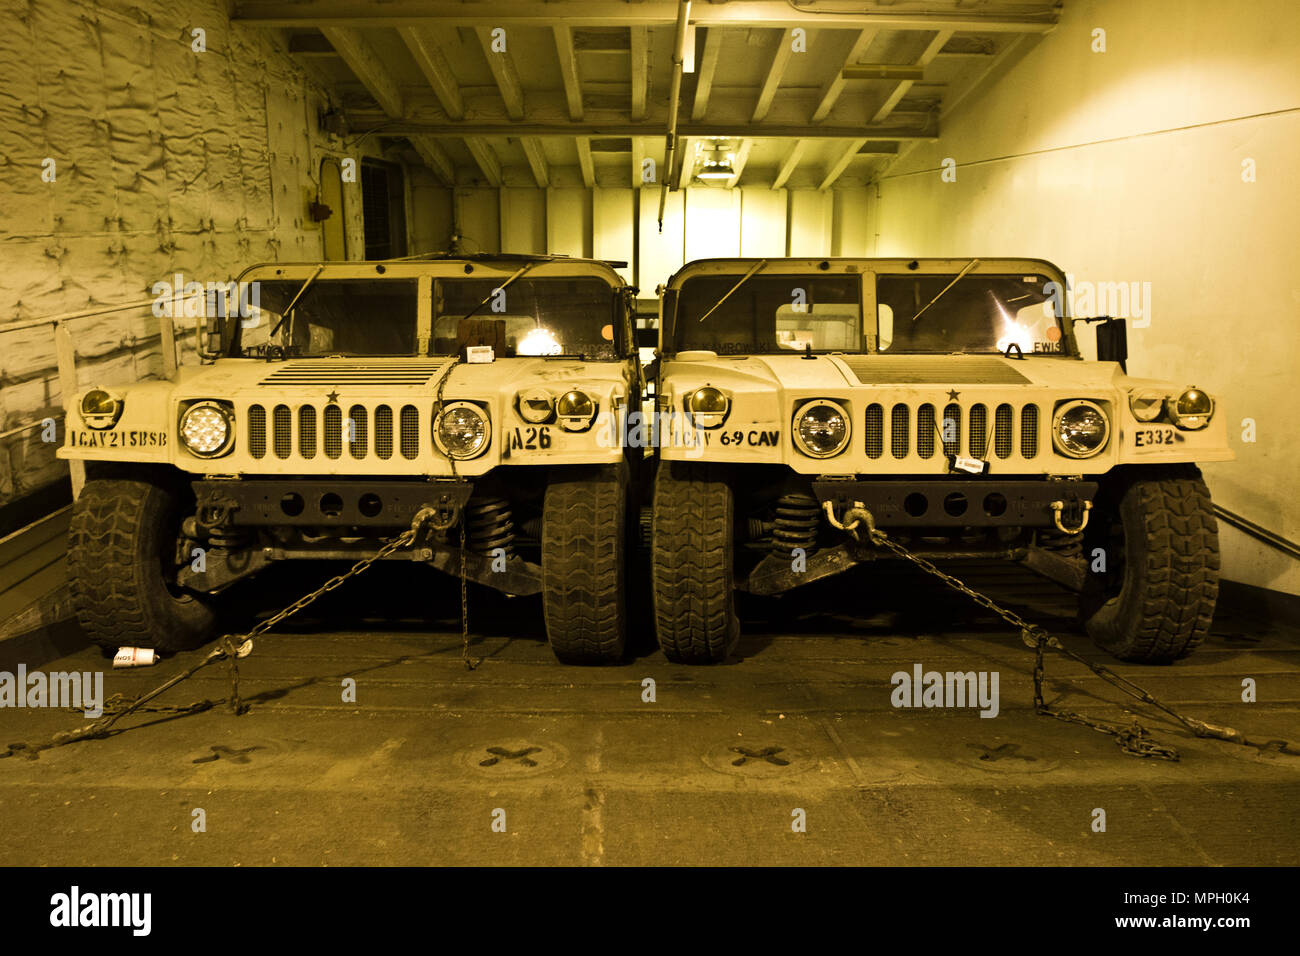 Humvees are staged on the USNS Mendonca at Shuaiba Port, Kuwait, on Feb. 28, 2017. The Mendonca is used to import and export U.S. Military vehicles in support of operations in the USCENTCOM AOR. (U.S. Army Photo by Staff Sgt. Dalton Smith) Stock Photo